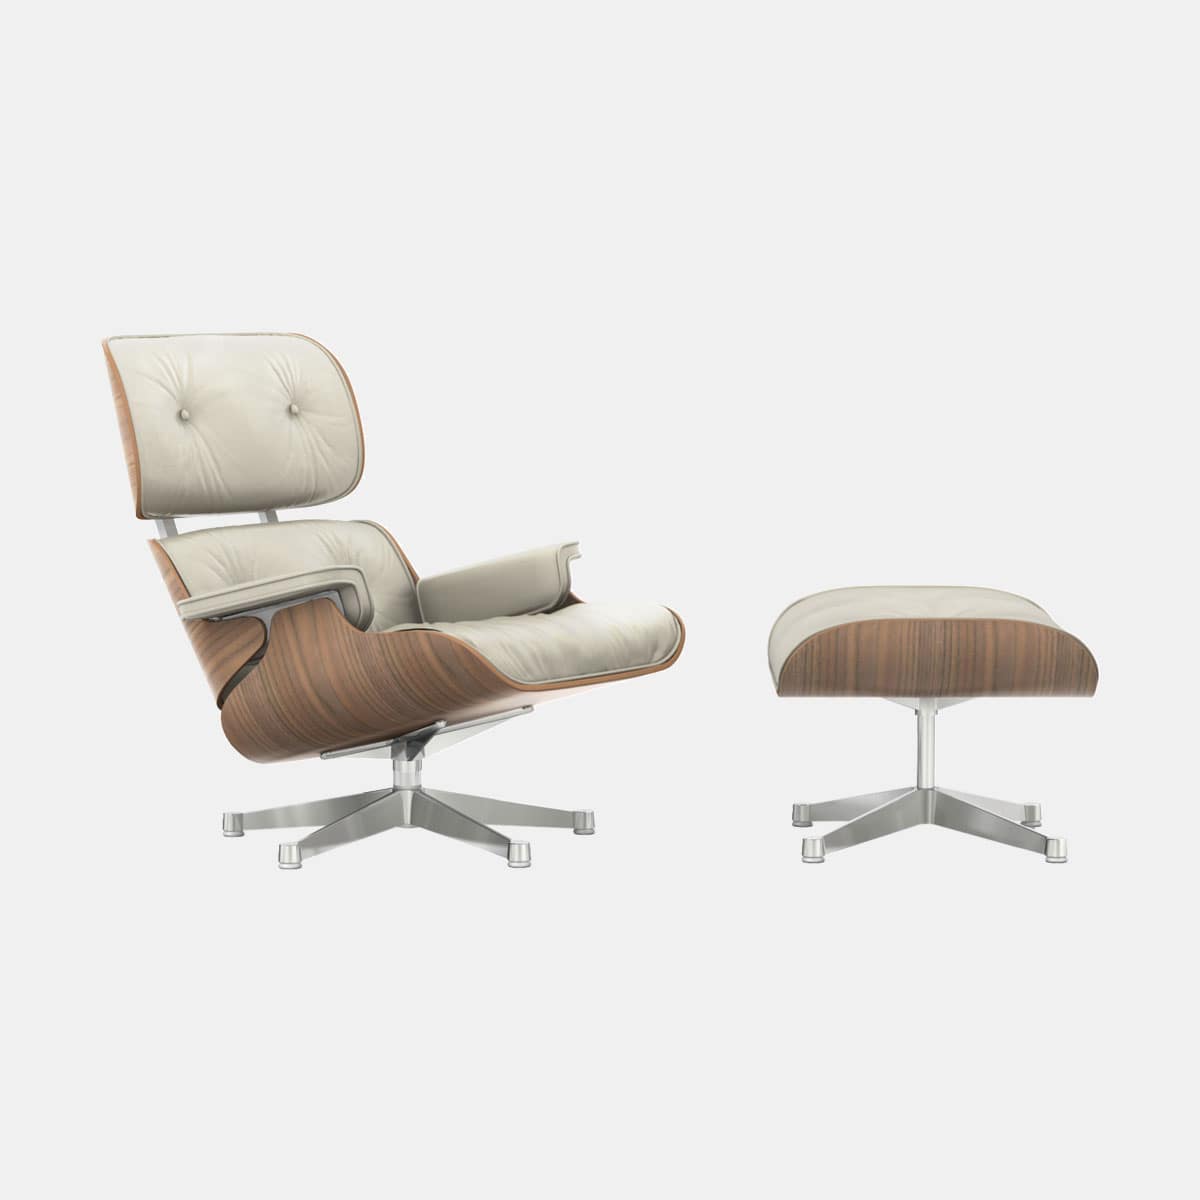 vitra-charles-ray-eames-lounge-chair-ottoman-walnoot-wit-leder-premium-clay-aluminium-gepolijst-001shop